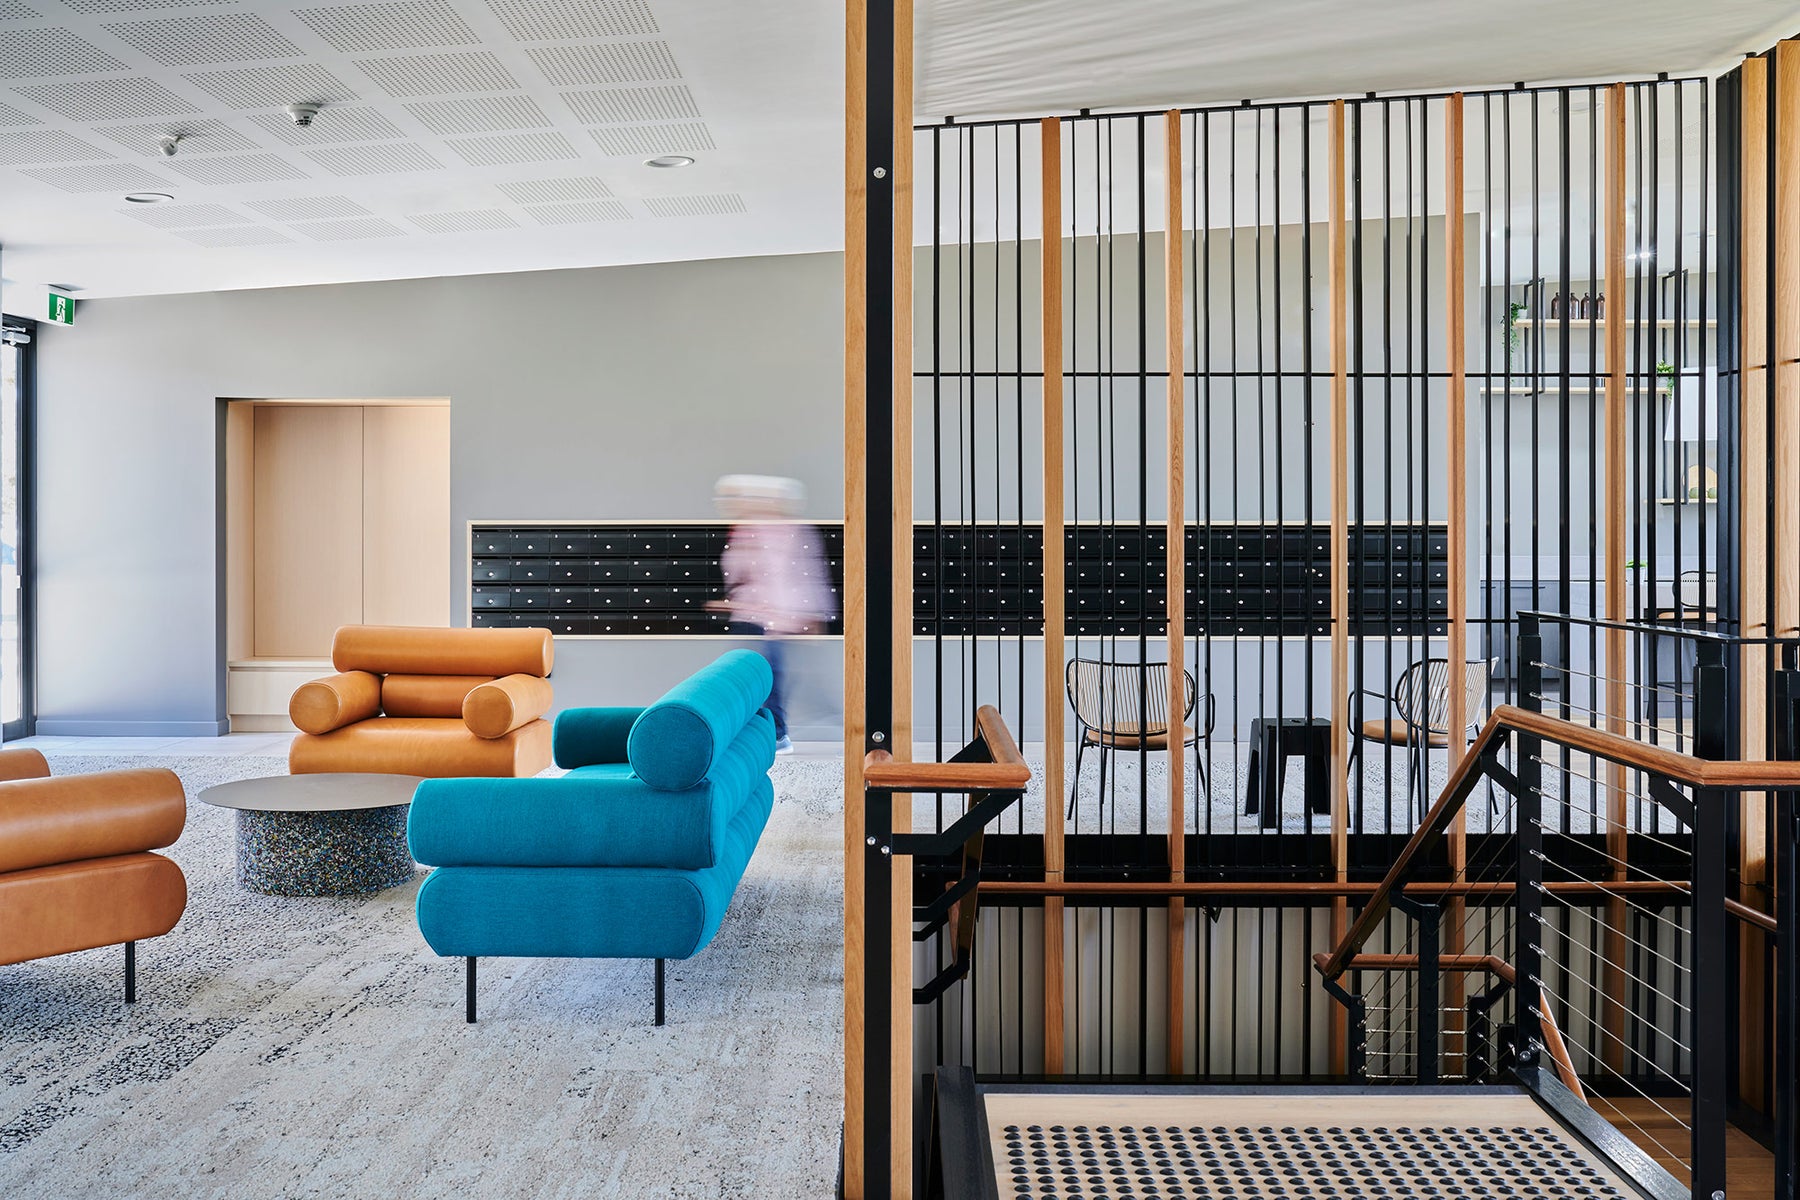 Cabin Leather Armchair & Cabin Lounge | The Henry Retirement Village Canberra | DesignByThem | Gallery